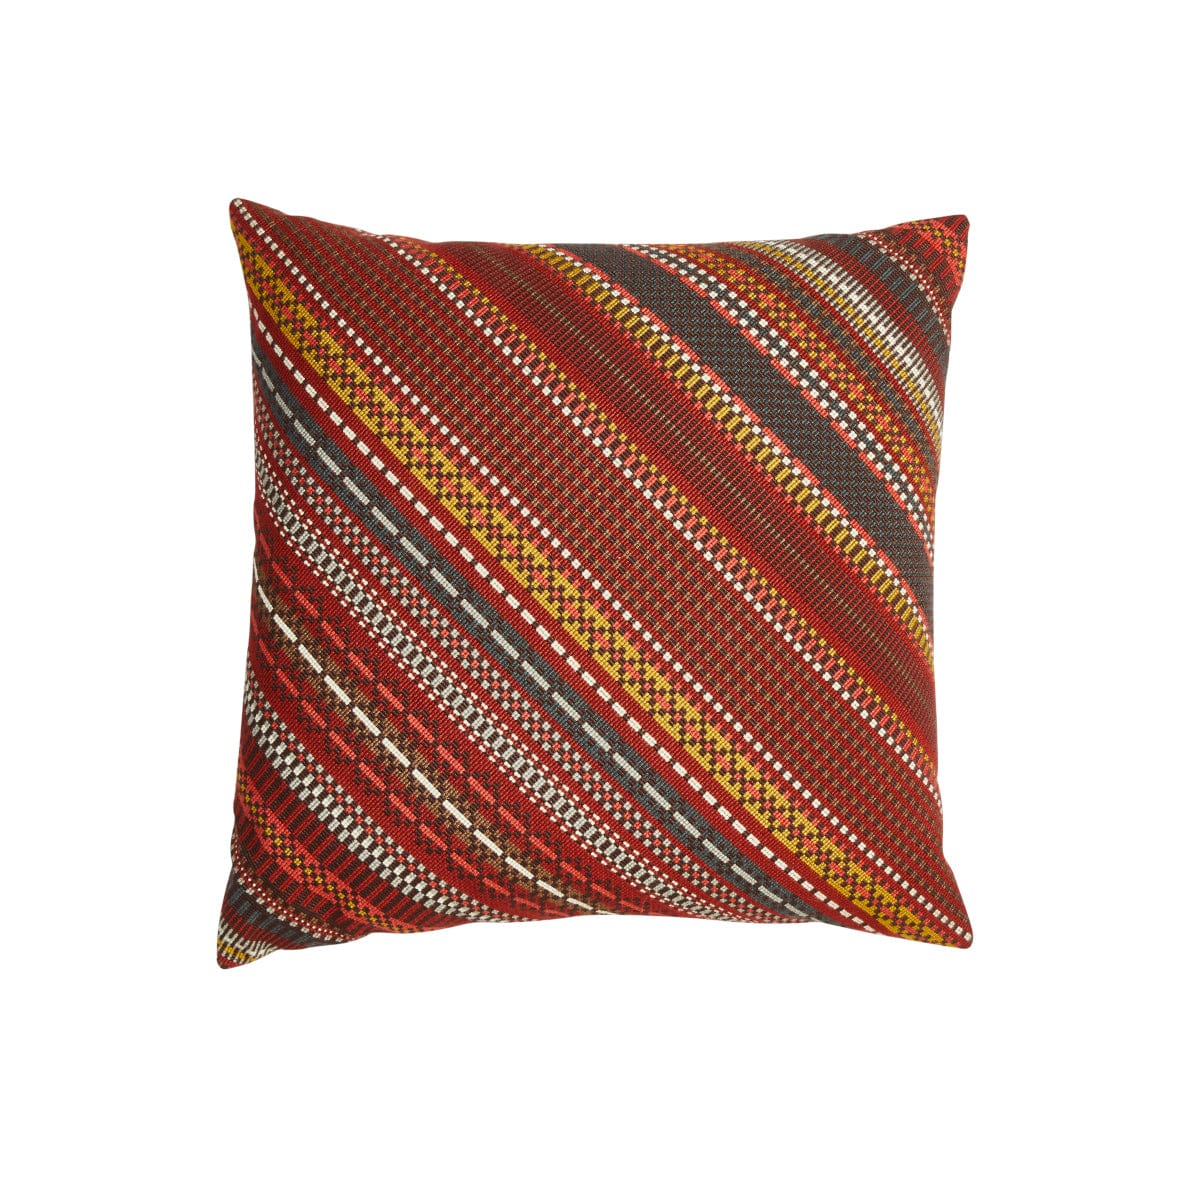 Hand Made Cushion - Striped Envelope